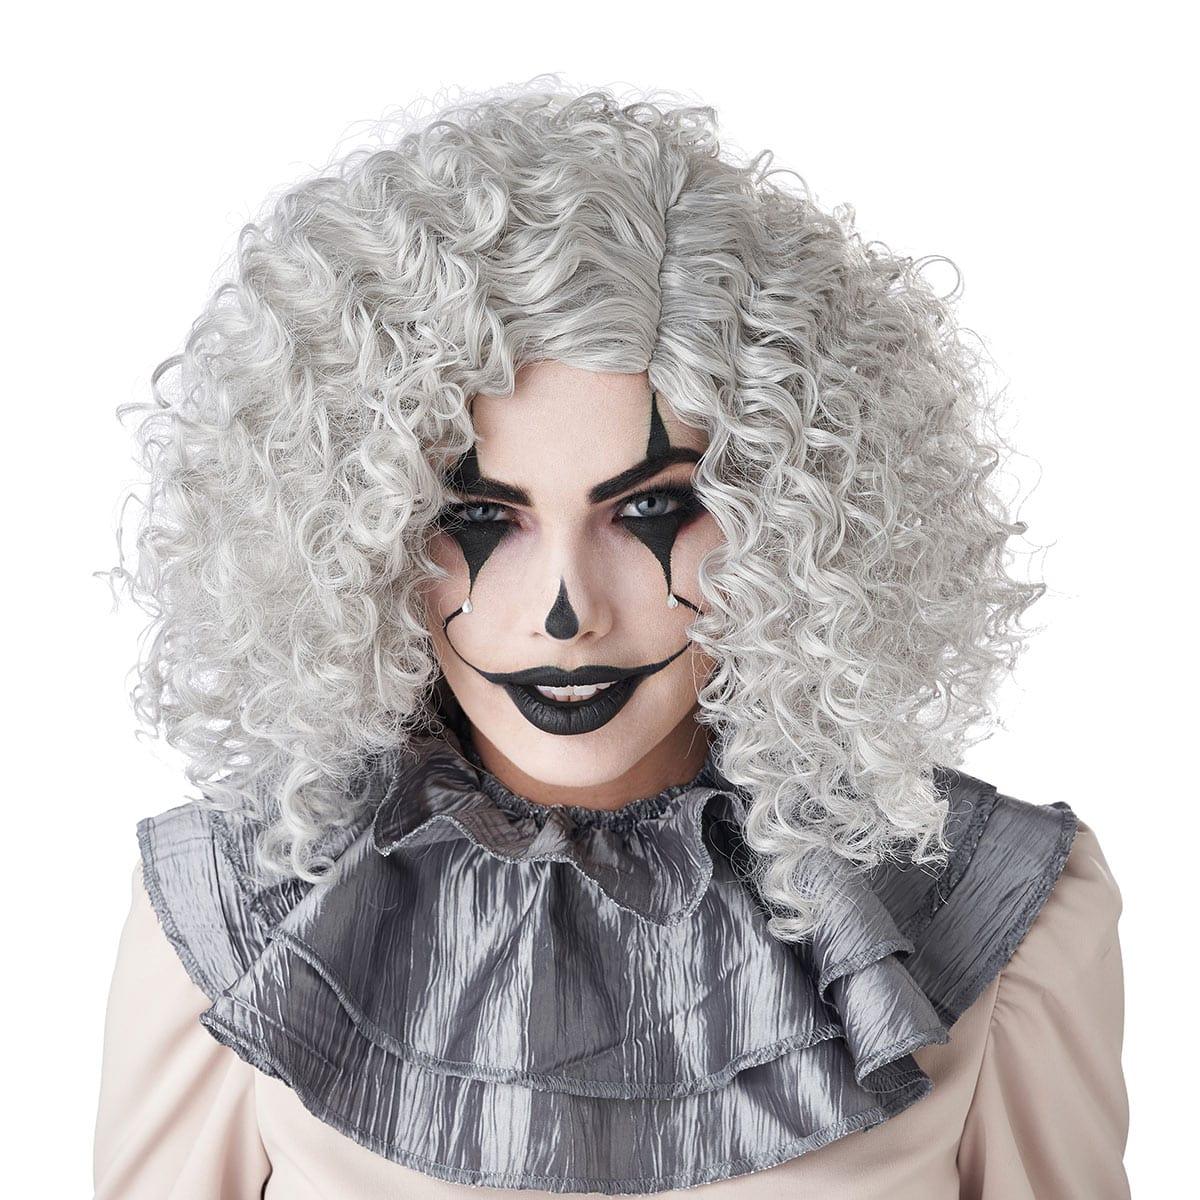 Buy Costume Accessories Gray corkscrew clown curls wig for women sold at Party Expert